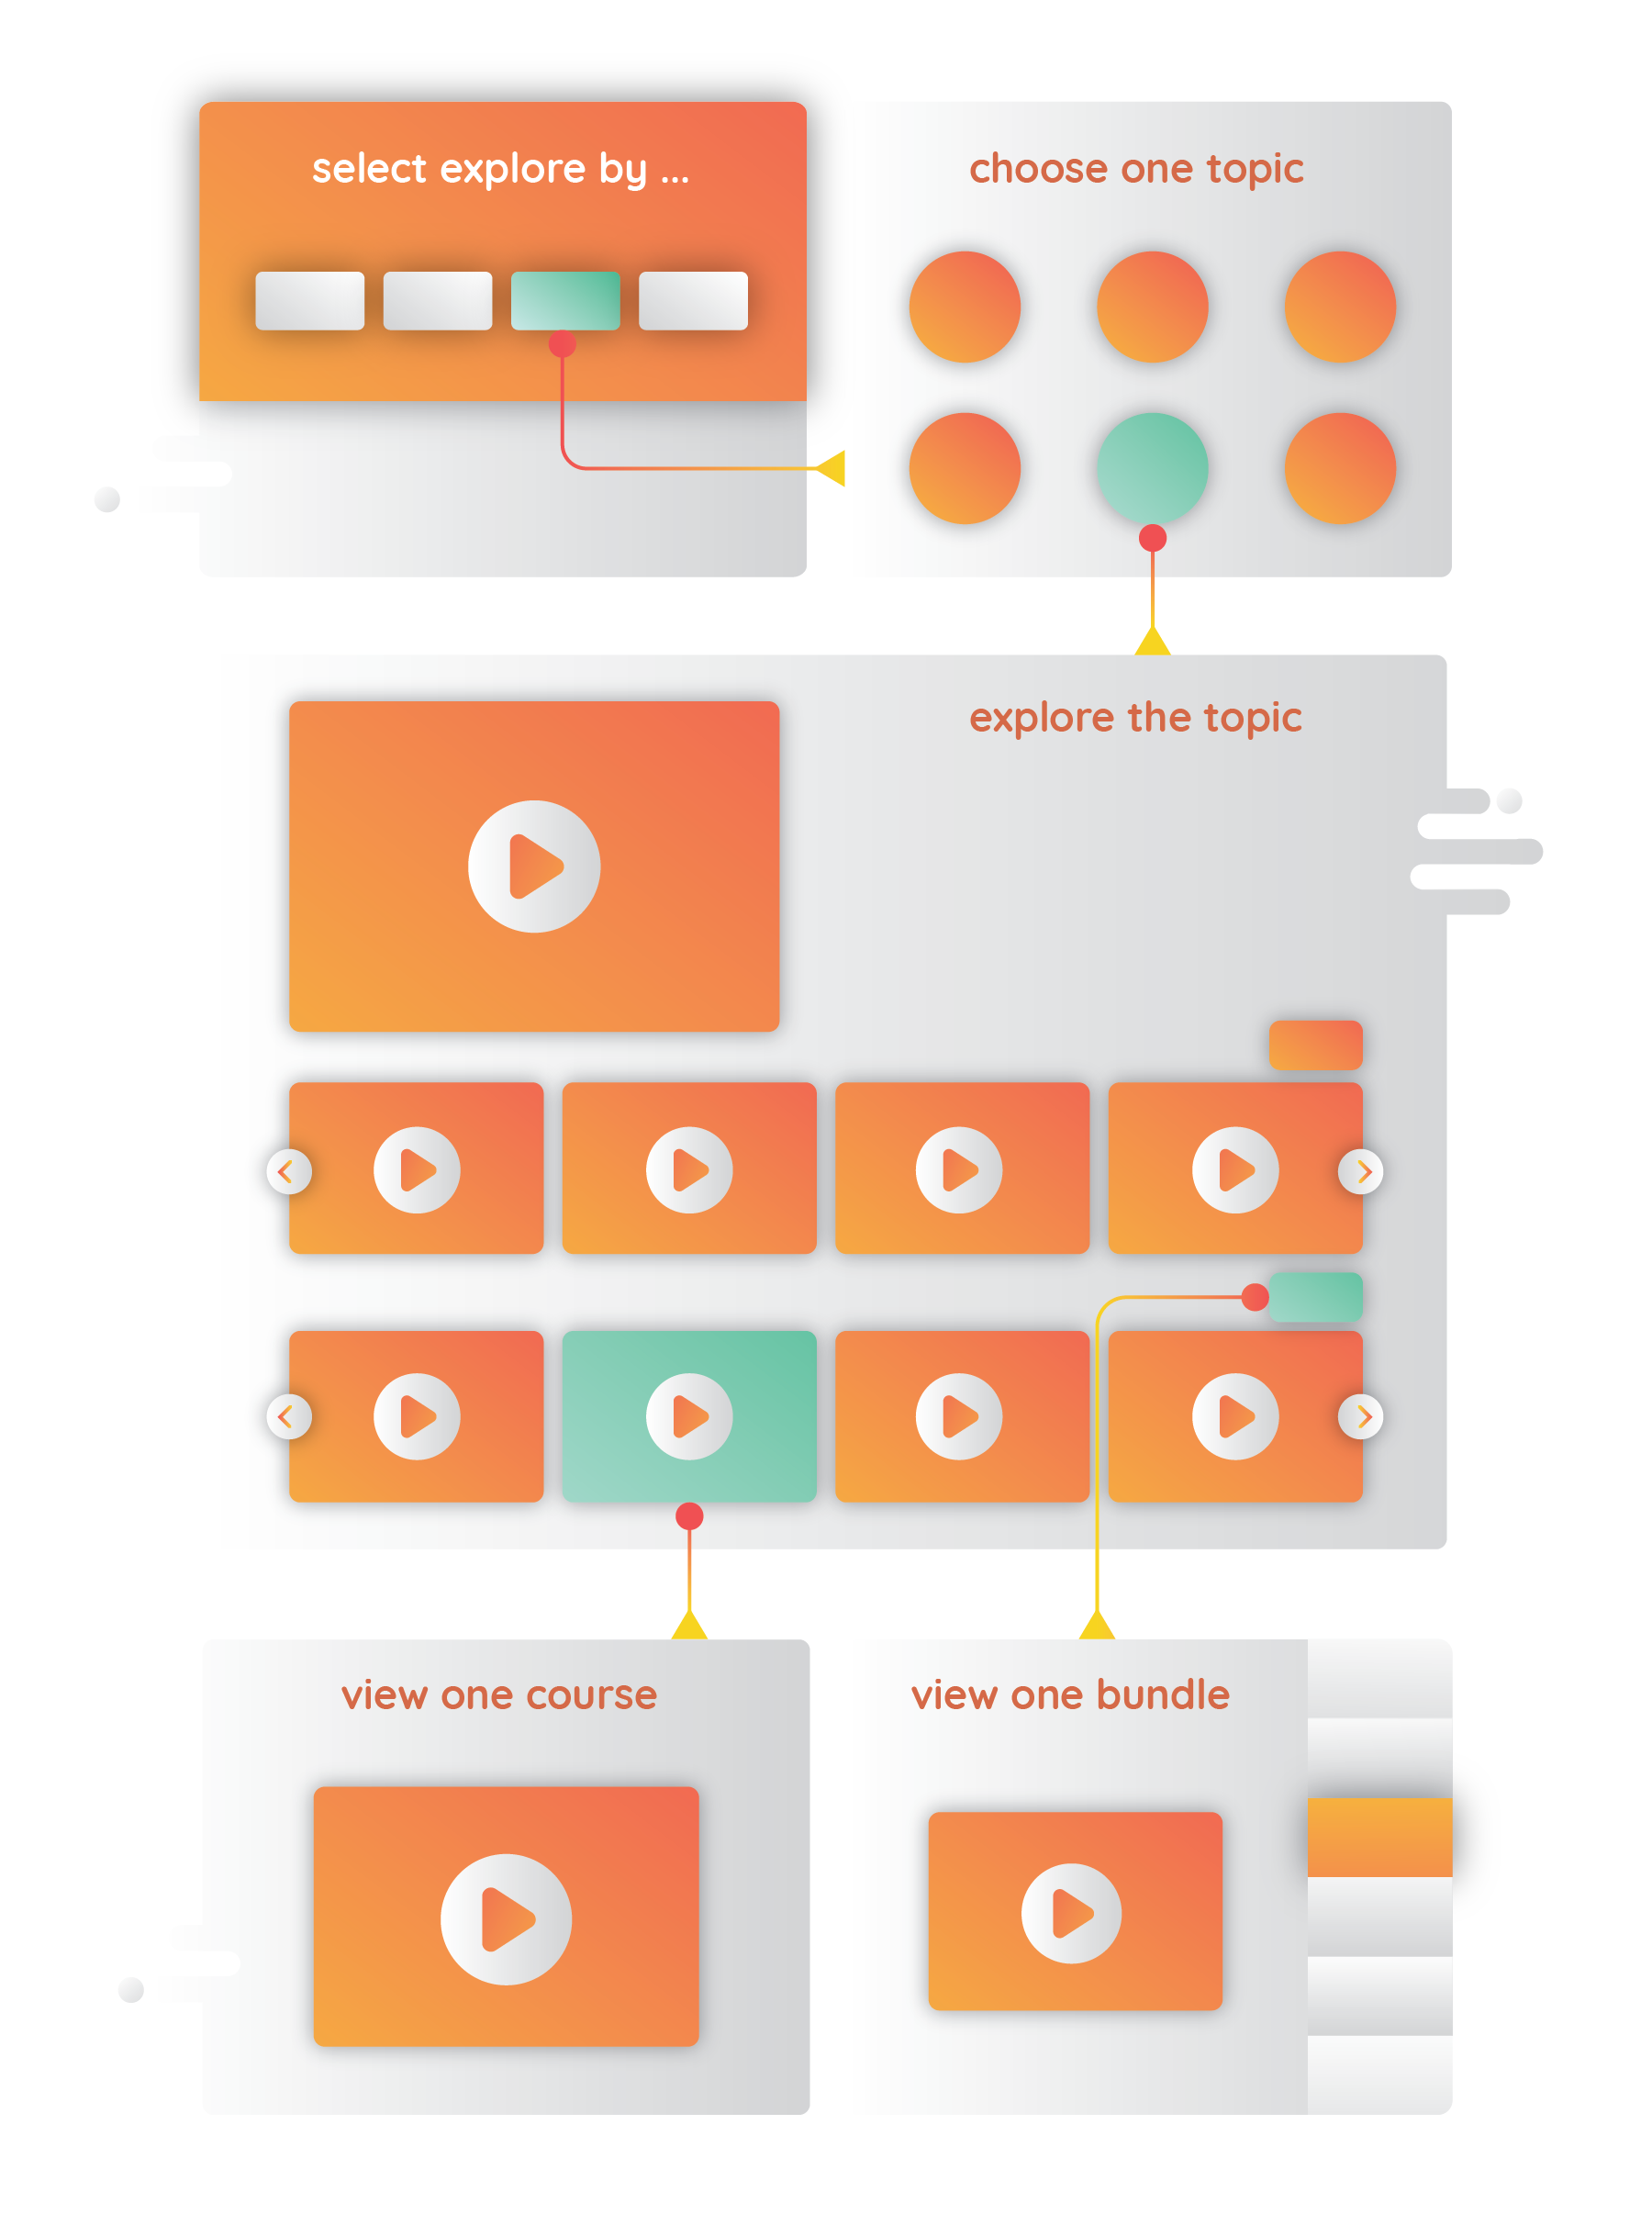 UX FLow from browsing course, enrolling to learning dashboard